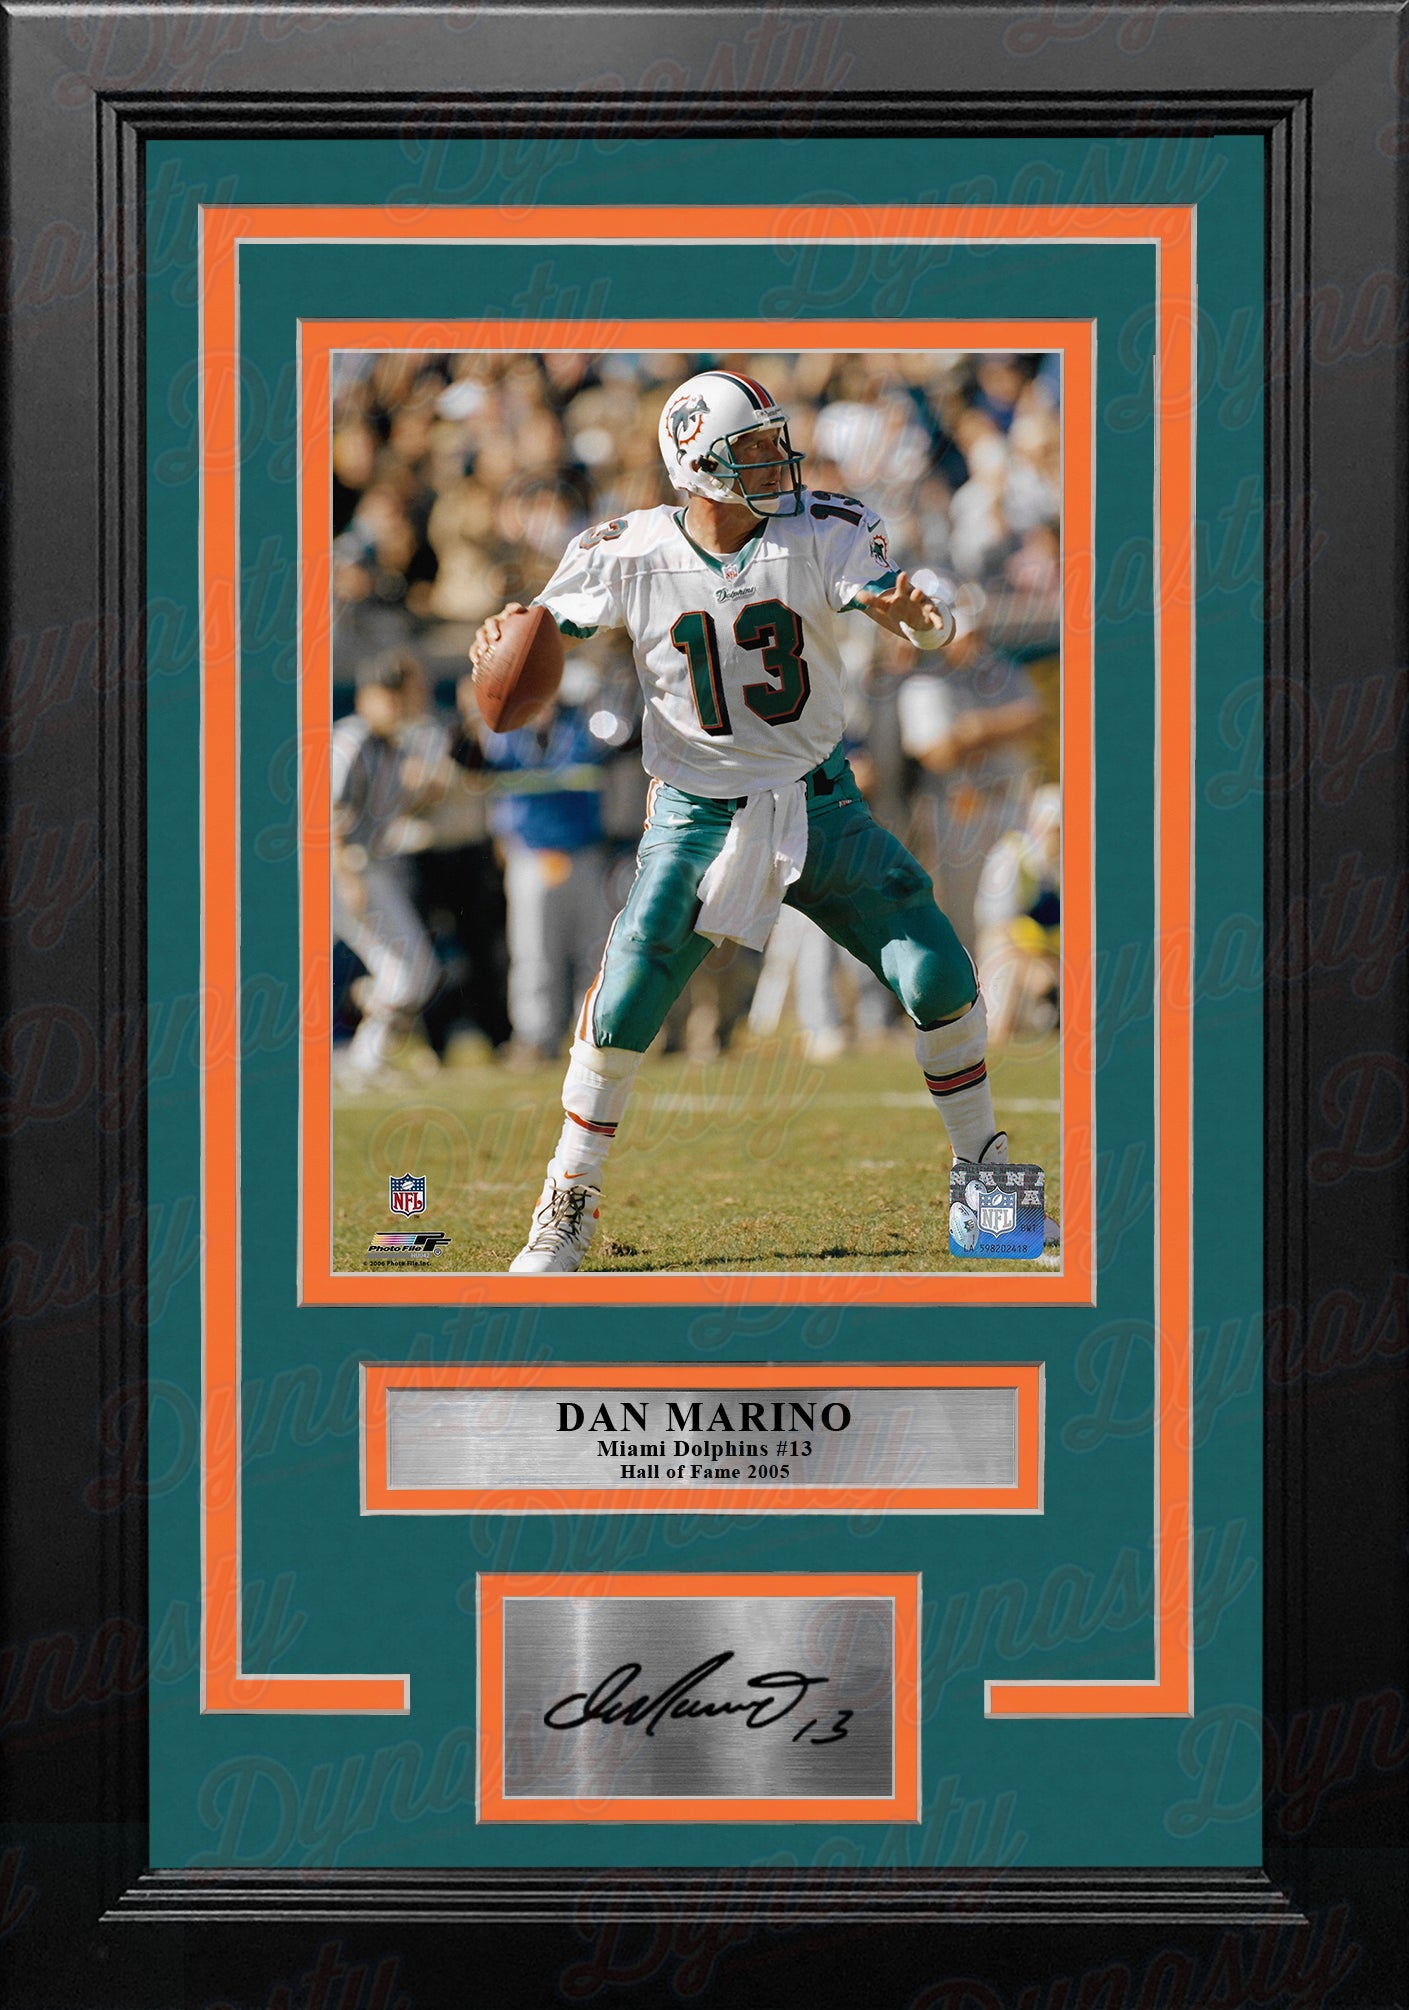 Dan Marino in Action Miami Dolphins 8" x 10" Framed Football Photo with Engraved Autograph - Dynasty Sports & Framing 